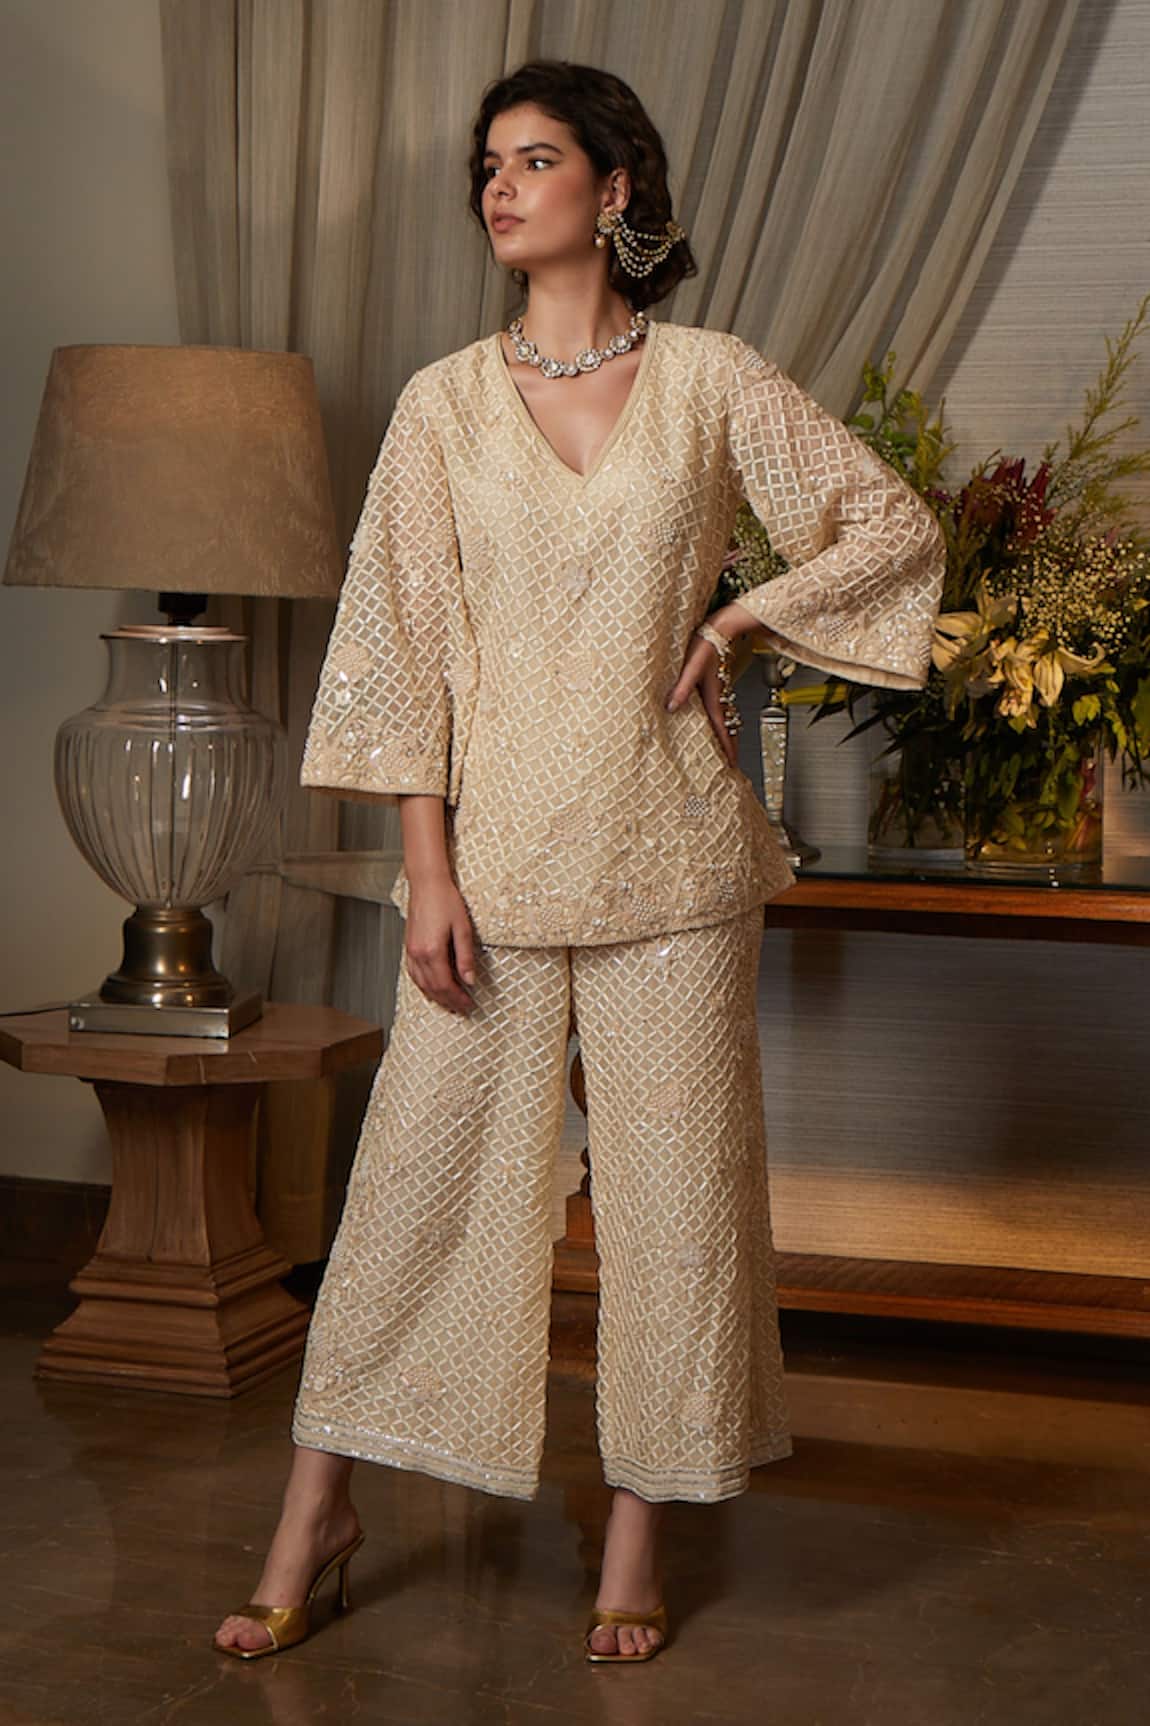 Kisneel by Pam Embroidered Top & Pant Set